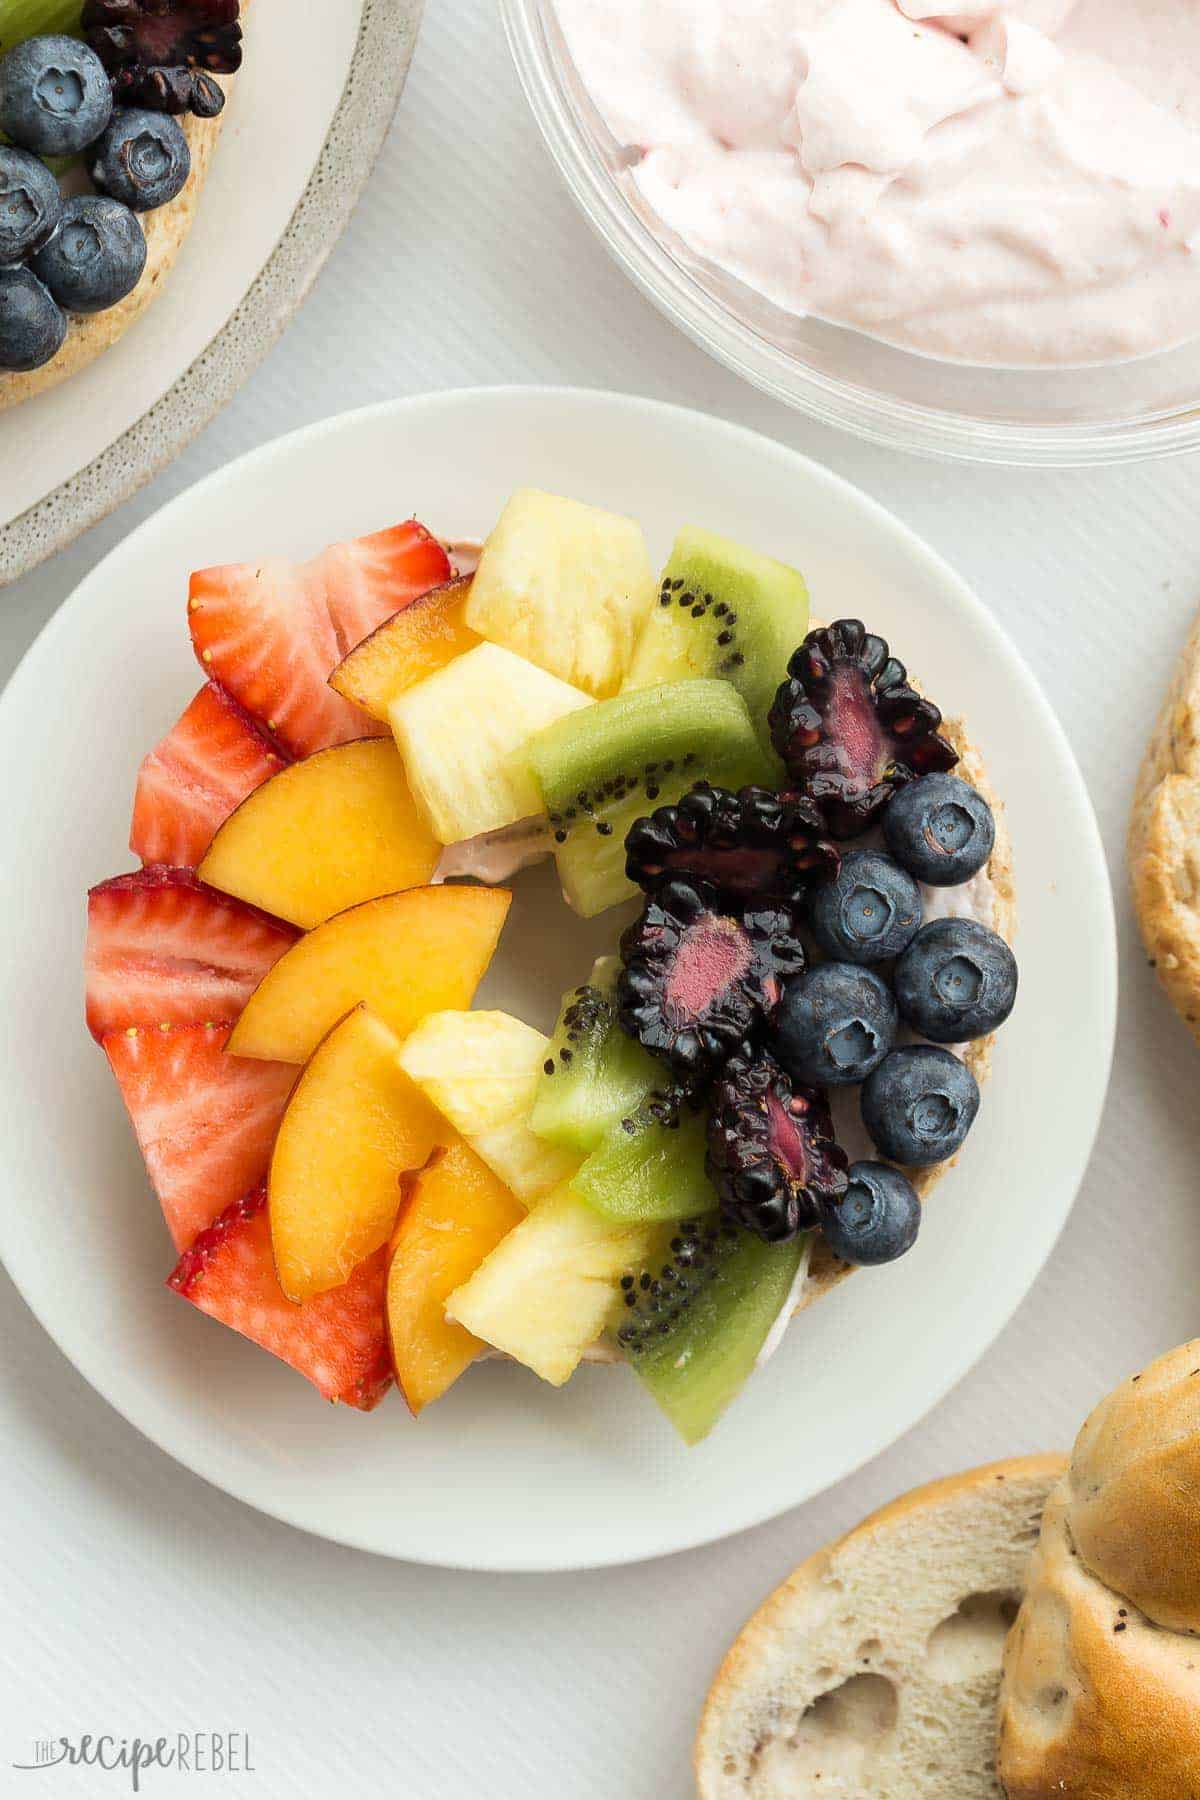 These Rainbow Bagel Fruit Pizzas with Strawberry Cream Cheese Spread are a fun breakfast or snack! Topped with a homemade, naturally sweetened strawberry cream cheese spread and fresh fruit that the kids (and the rest of the family!) will love! A fun treat for Easter, St. Patrick's Day or any day! Includes step by step recipe video. #rainbowfood rainbow food #fruit #breakfast #brunch #creamcheese 